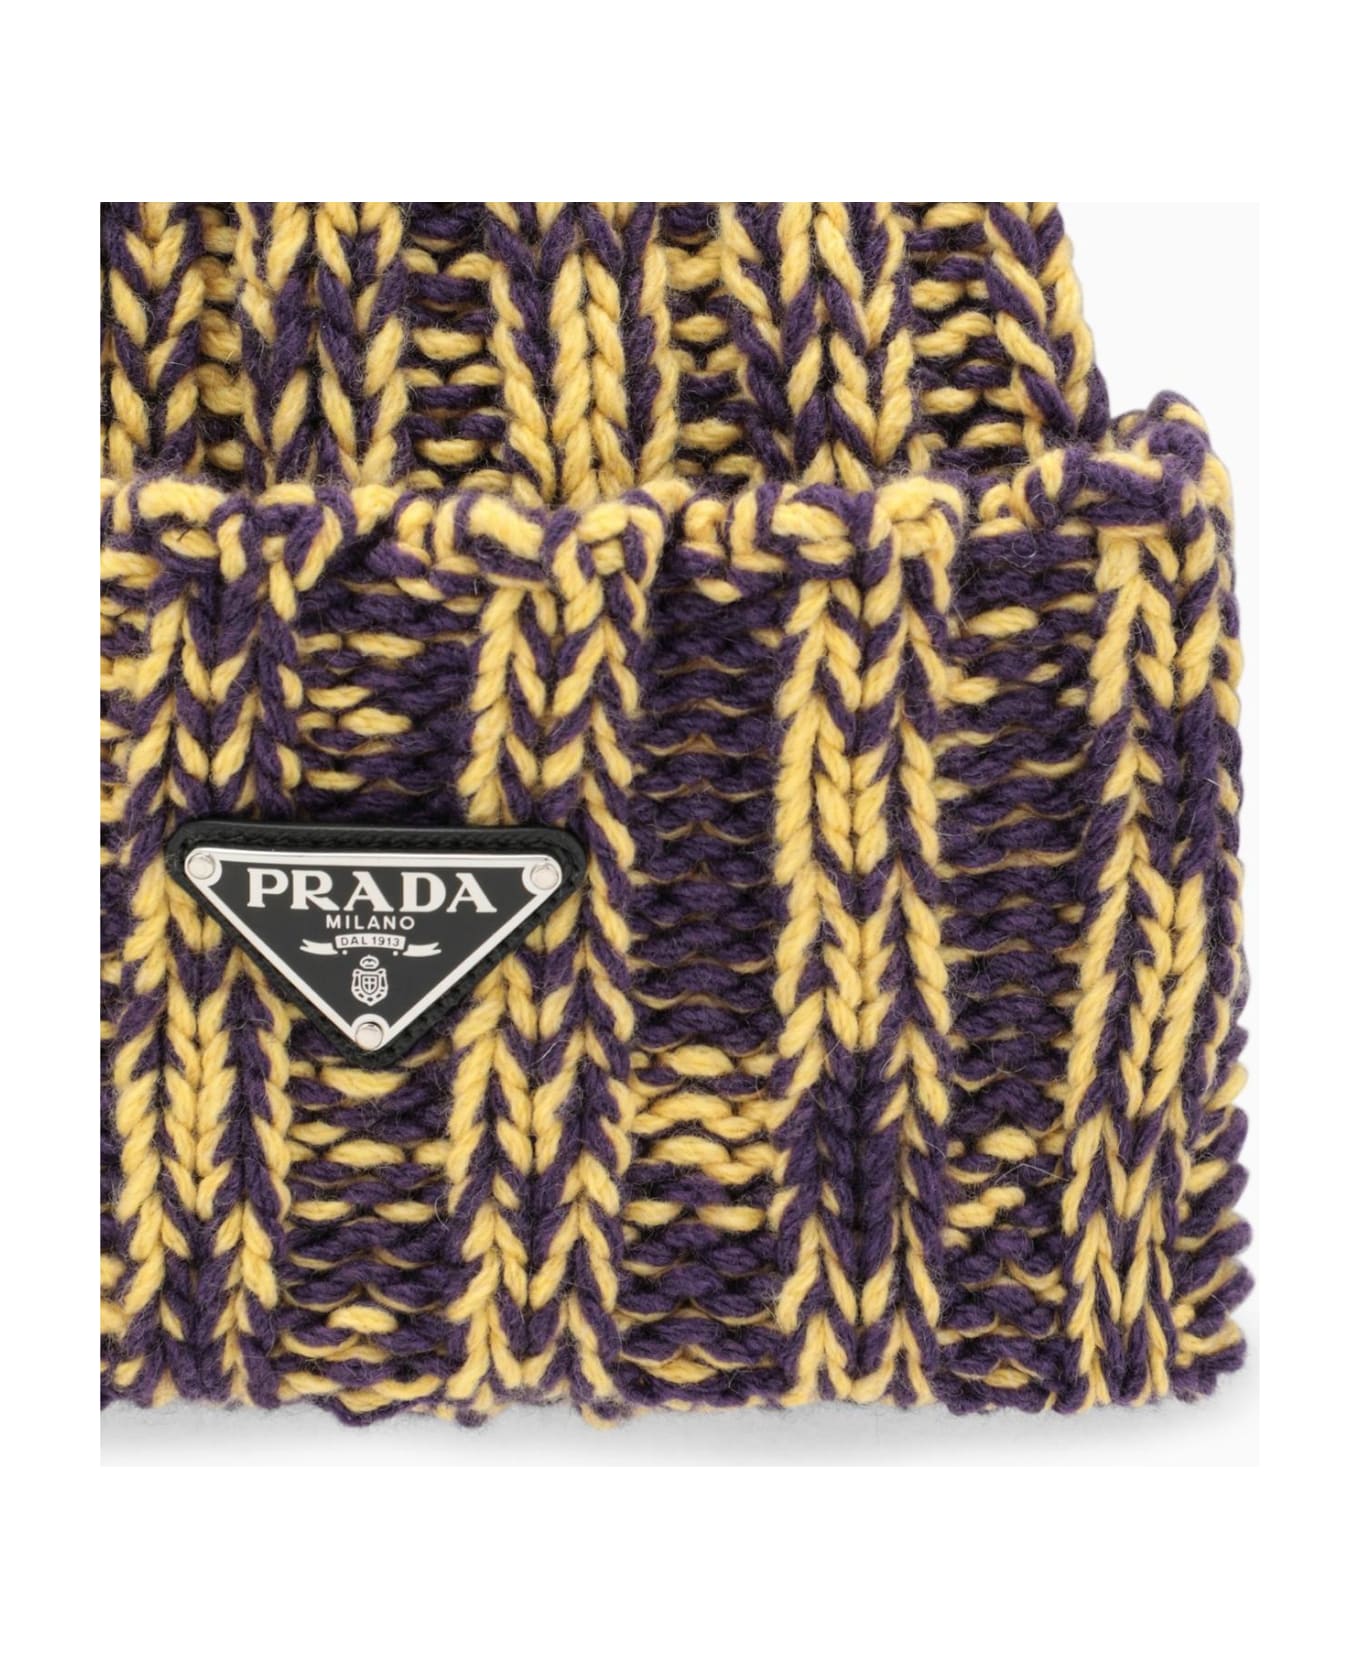 Prada Violet\/yellow Wool And Cashmere Hat - VIOLA+GIALLO